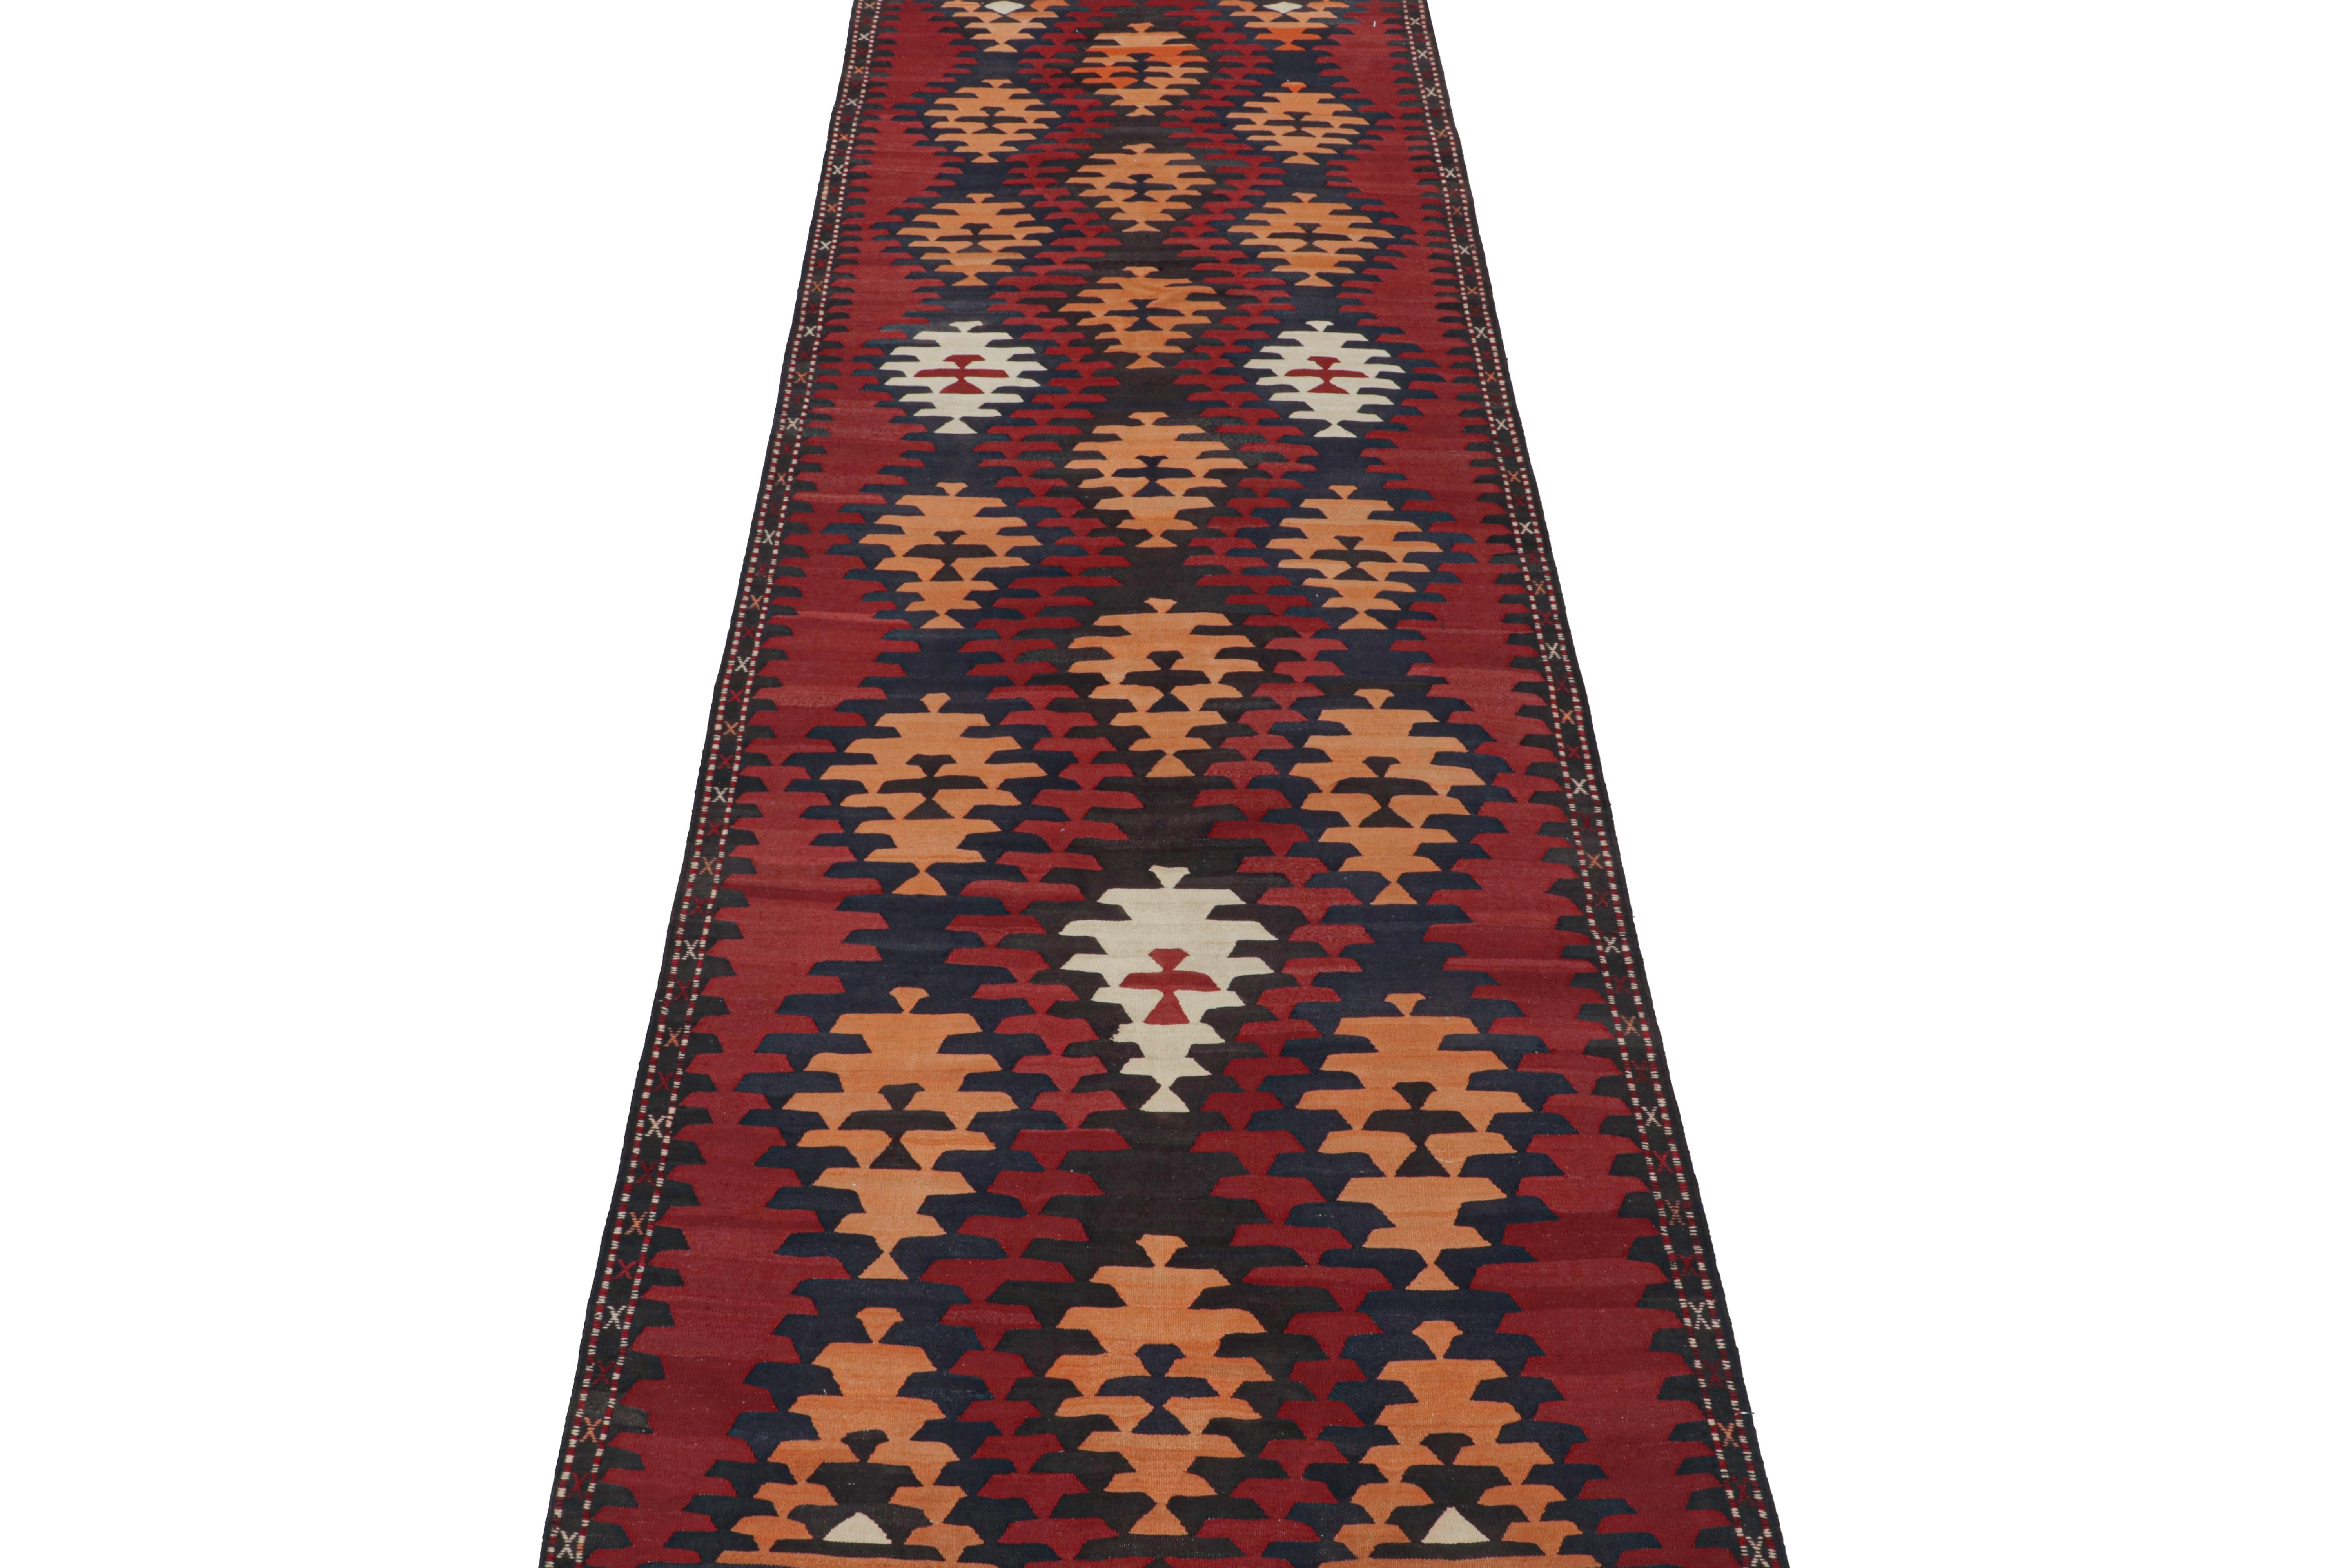 This vintage 5x14 Persian Kilim is a tribal gallery runner believed to originate in the Karadagh region.

Handwoven in wool circa 1950-1960, its design favors a clean approach to traditional geometric patterns and particularly rich colors. Keen